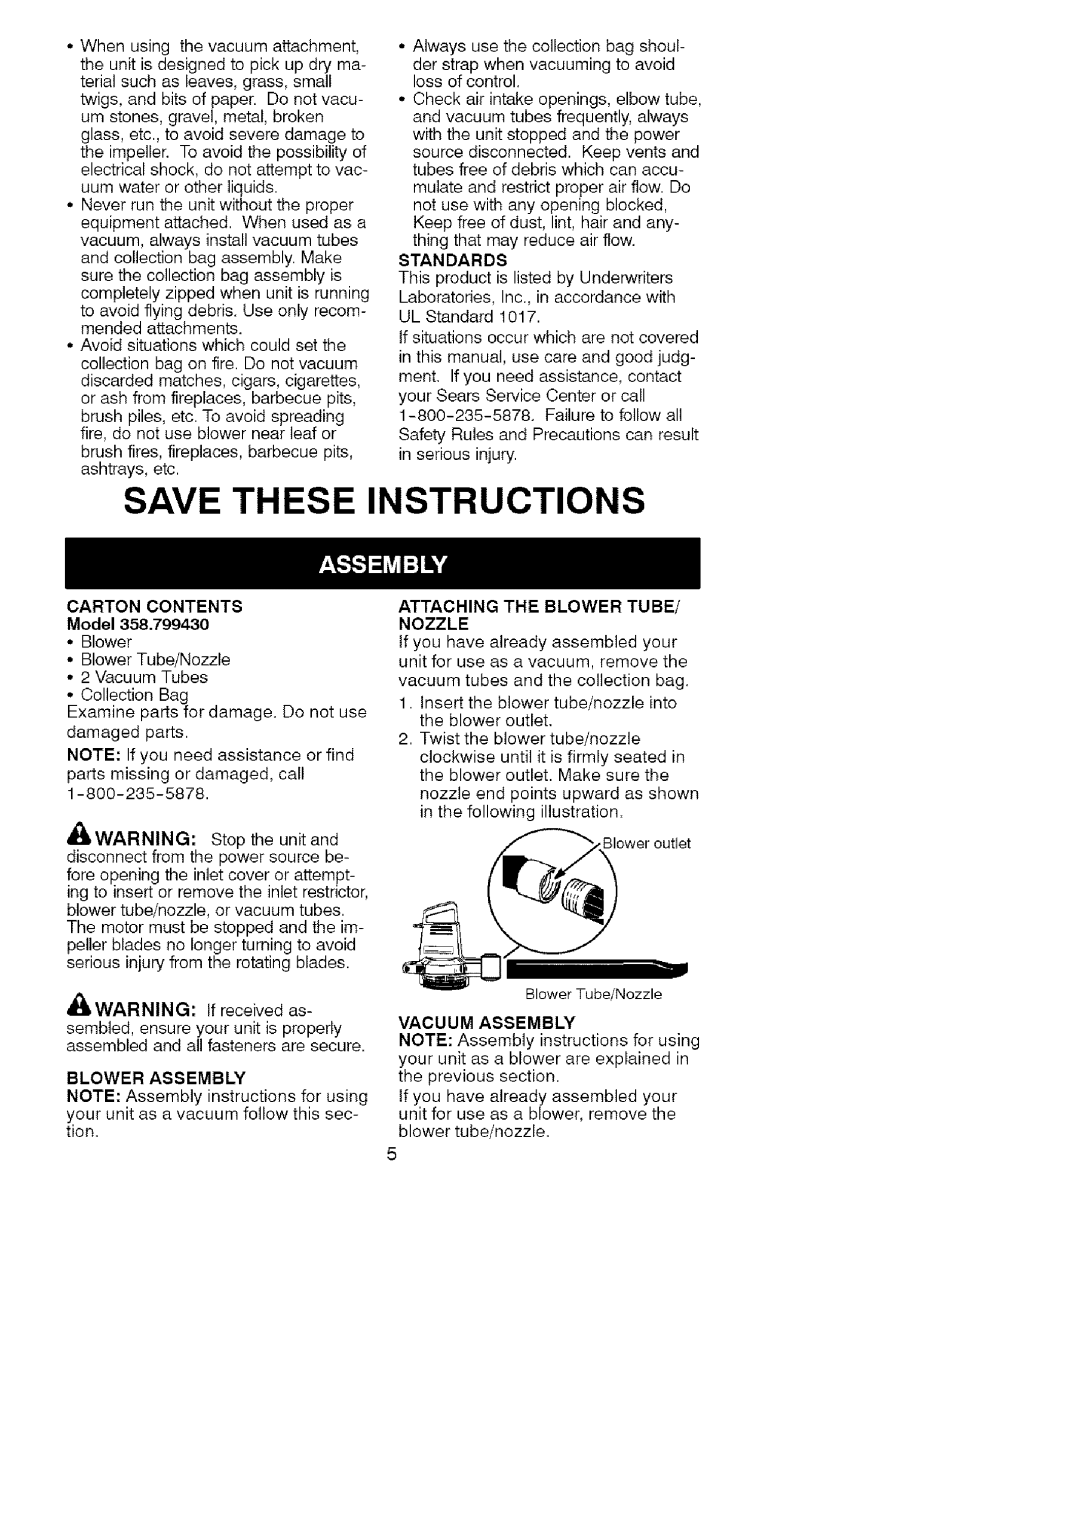 Craftsman 358.799430 Save These Instructions, CARTON CONTENTS Model, Blower Assembly, Attaching The Blower Tube/ Nozzle 